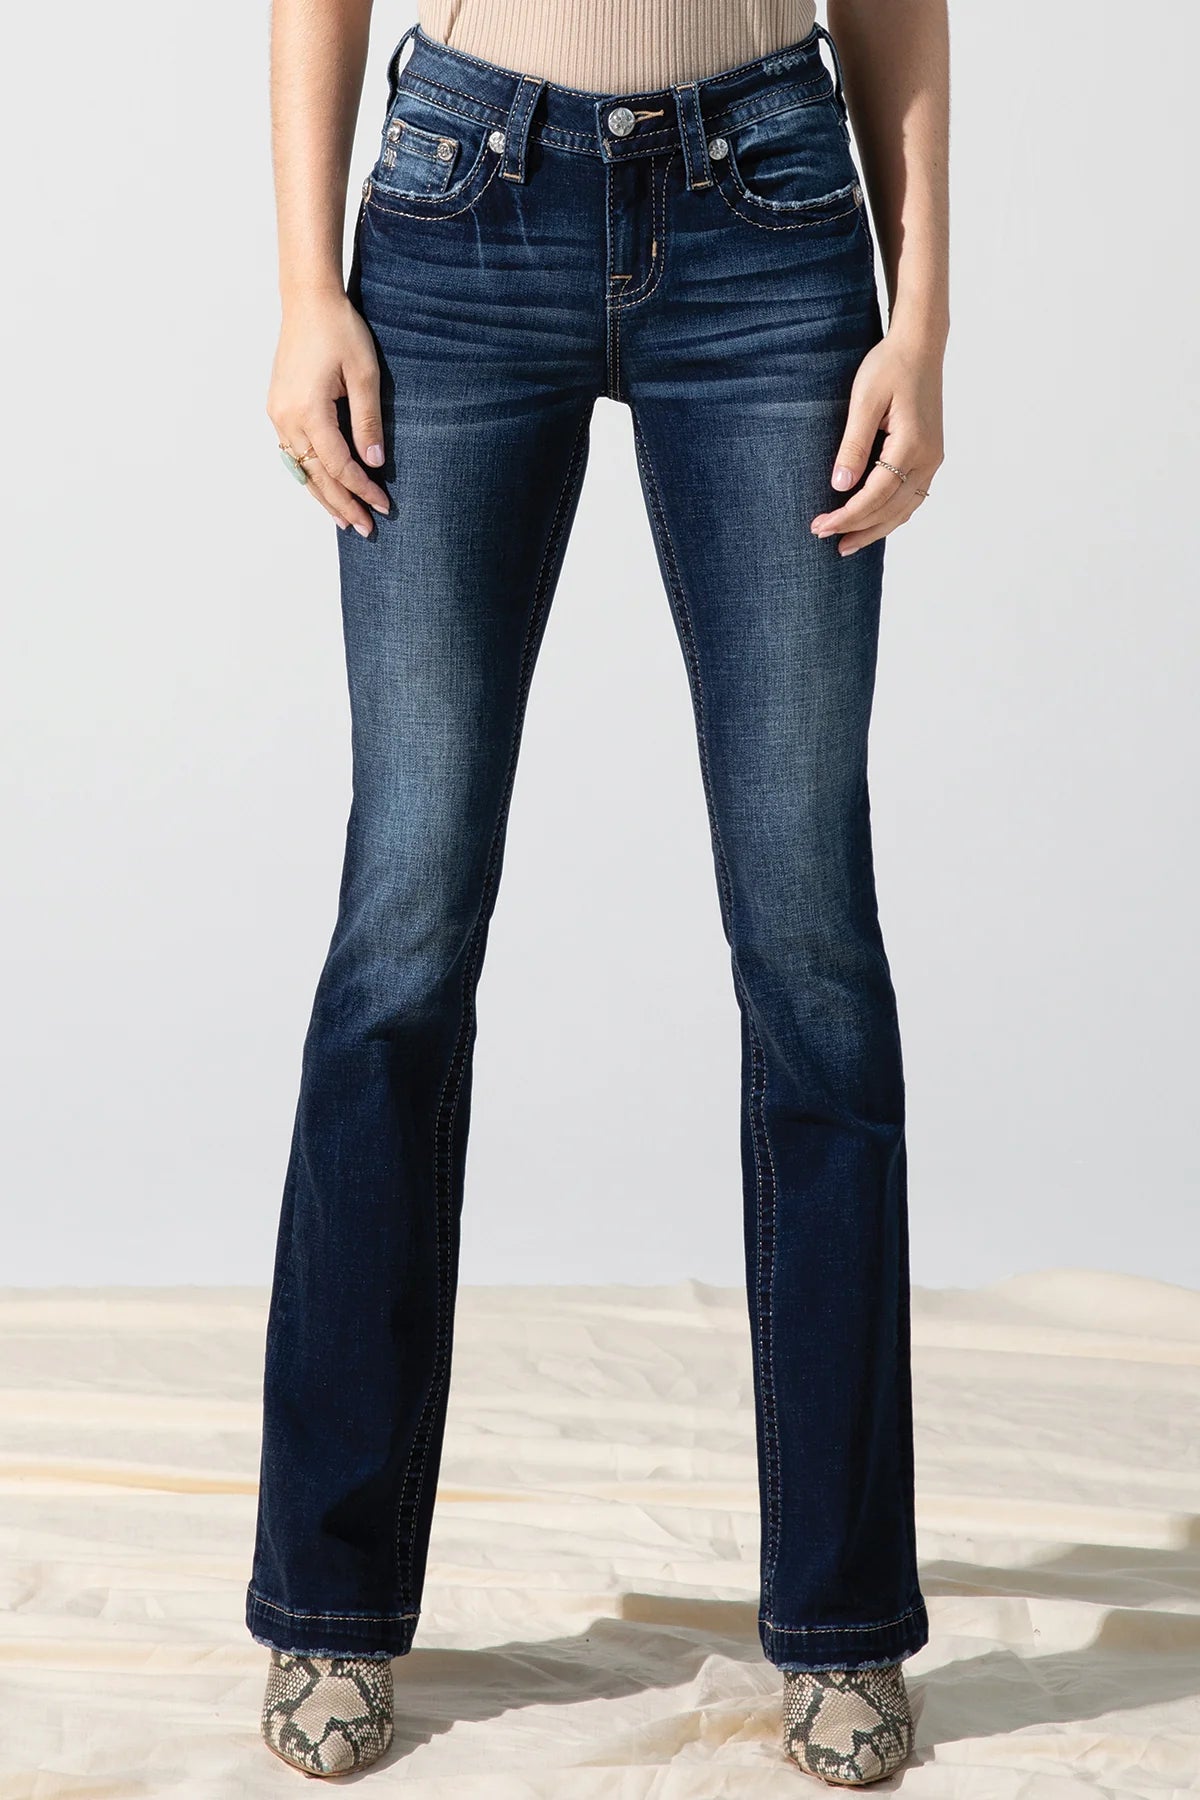 Uplift Bootcut Jeans